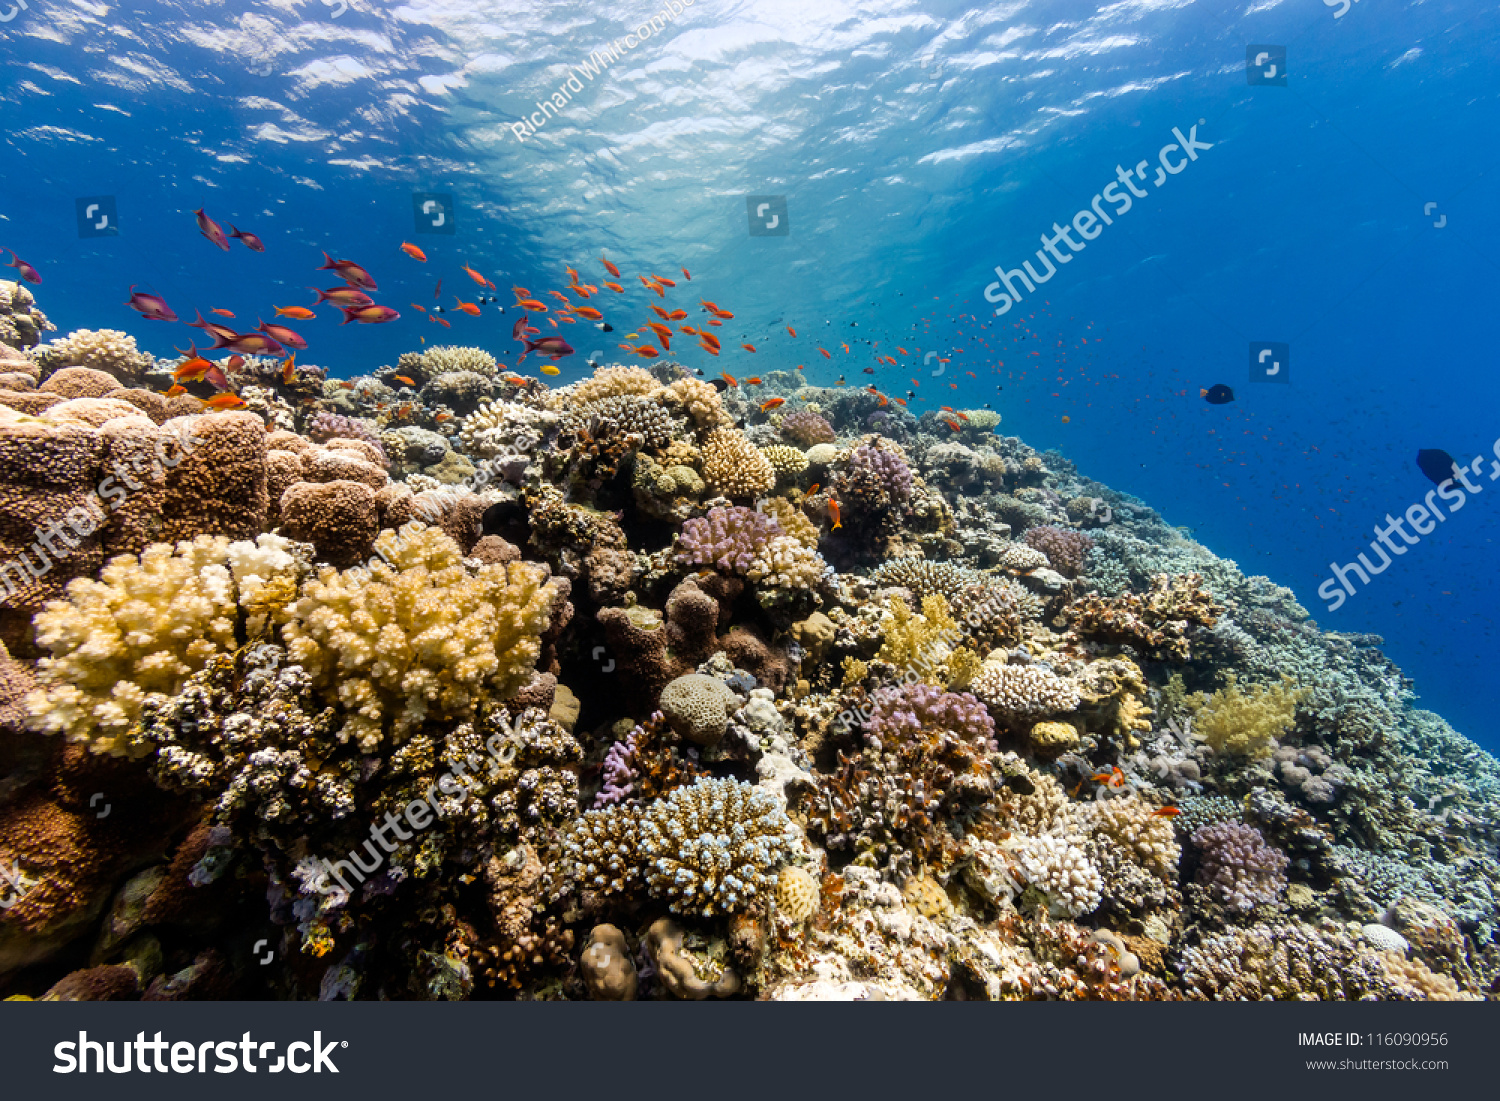 A Thriving,Healthy Coral Reef Covered In Hard Corals, Soft Coral With ...